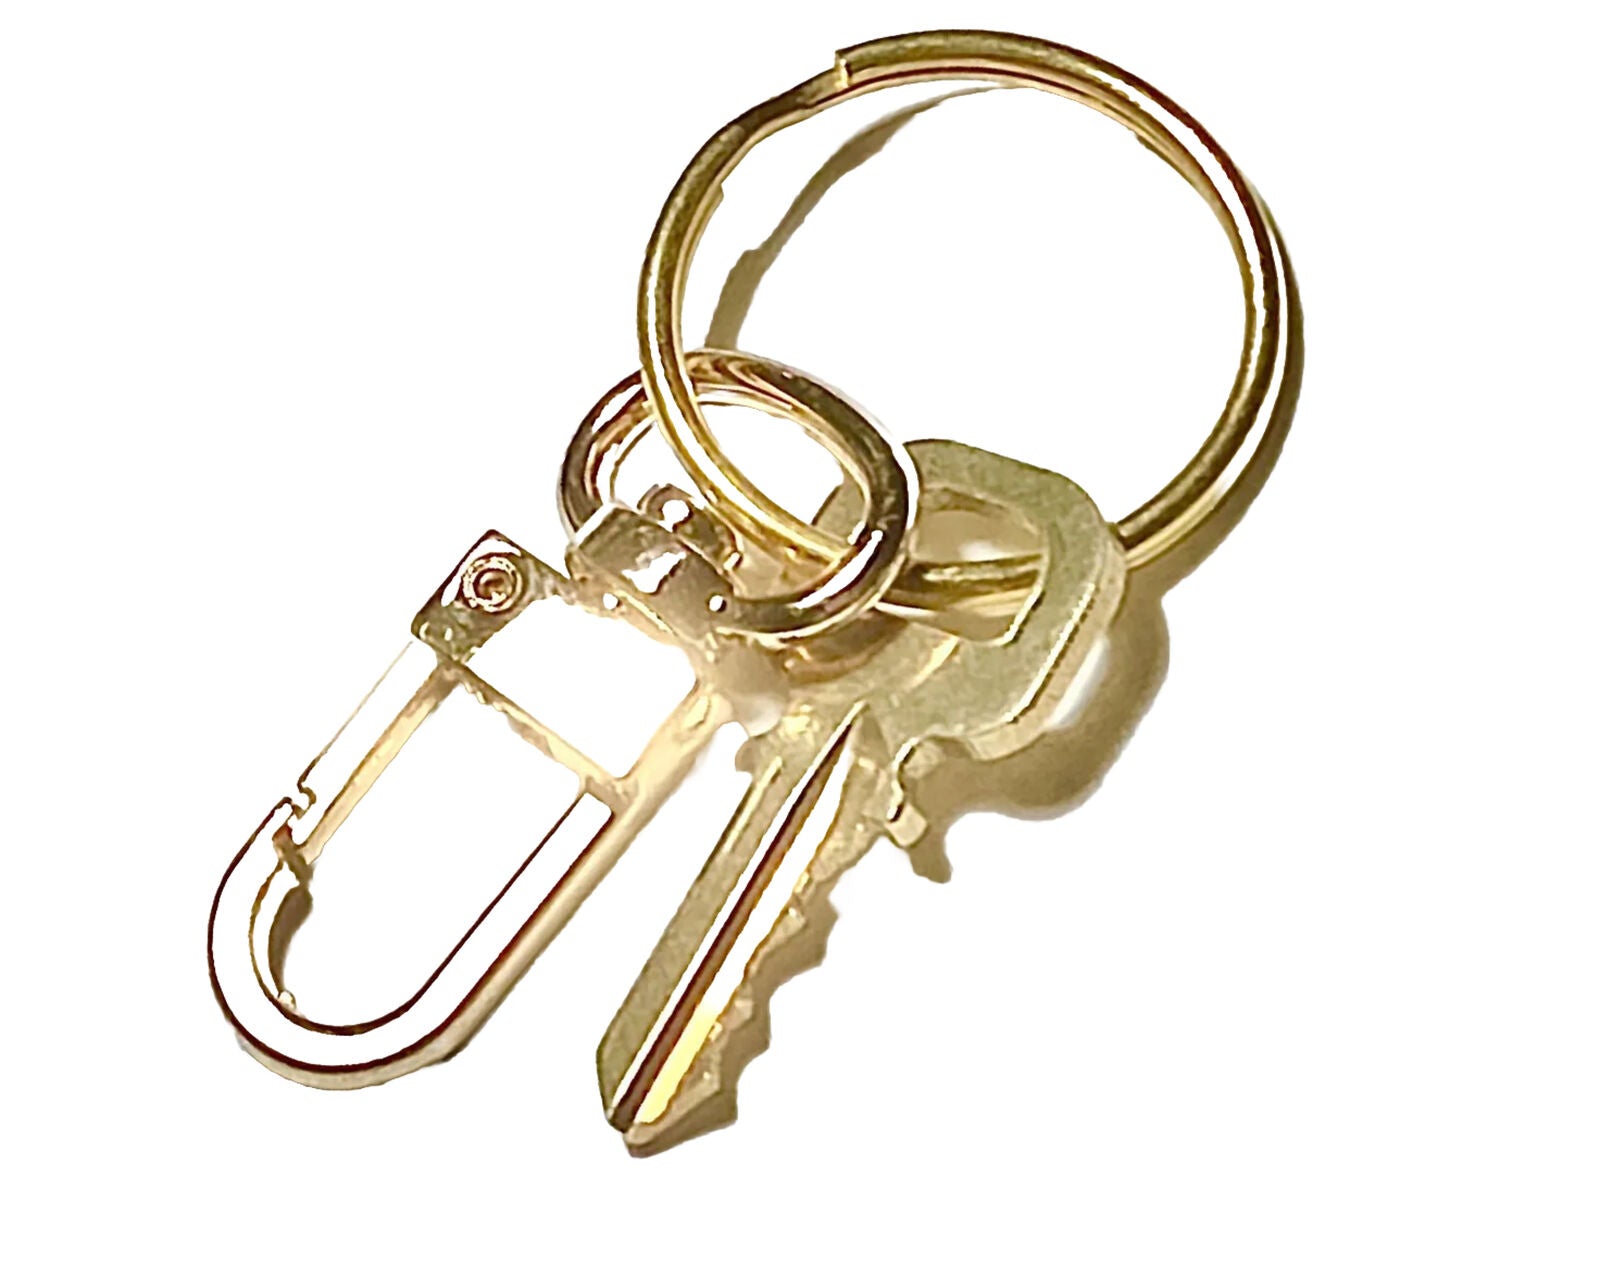 1 Pc Louis Vuitton Key 347 Brass Goldtone - Fits Authentic Lock Only